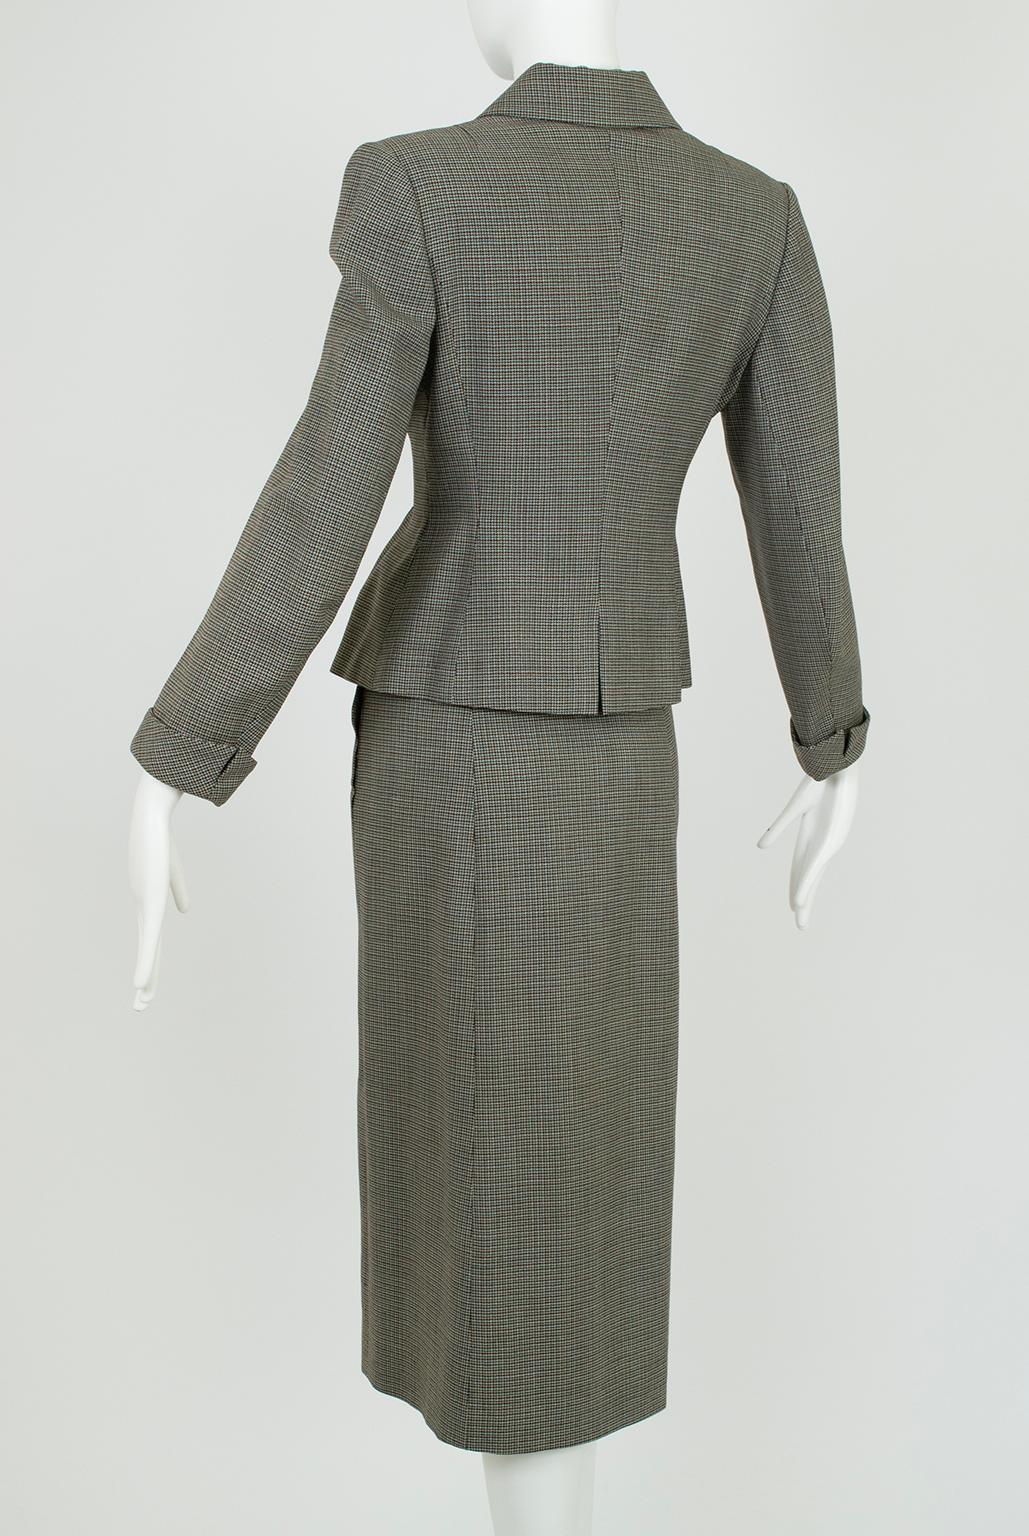 French Blue and Brown Houndstooth Cutaway Suit with Novelty Buttons – S-M, 1940s In Good Condition For Sale In Tucson, AZ